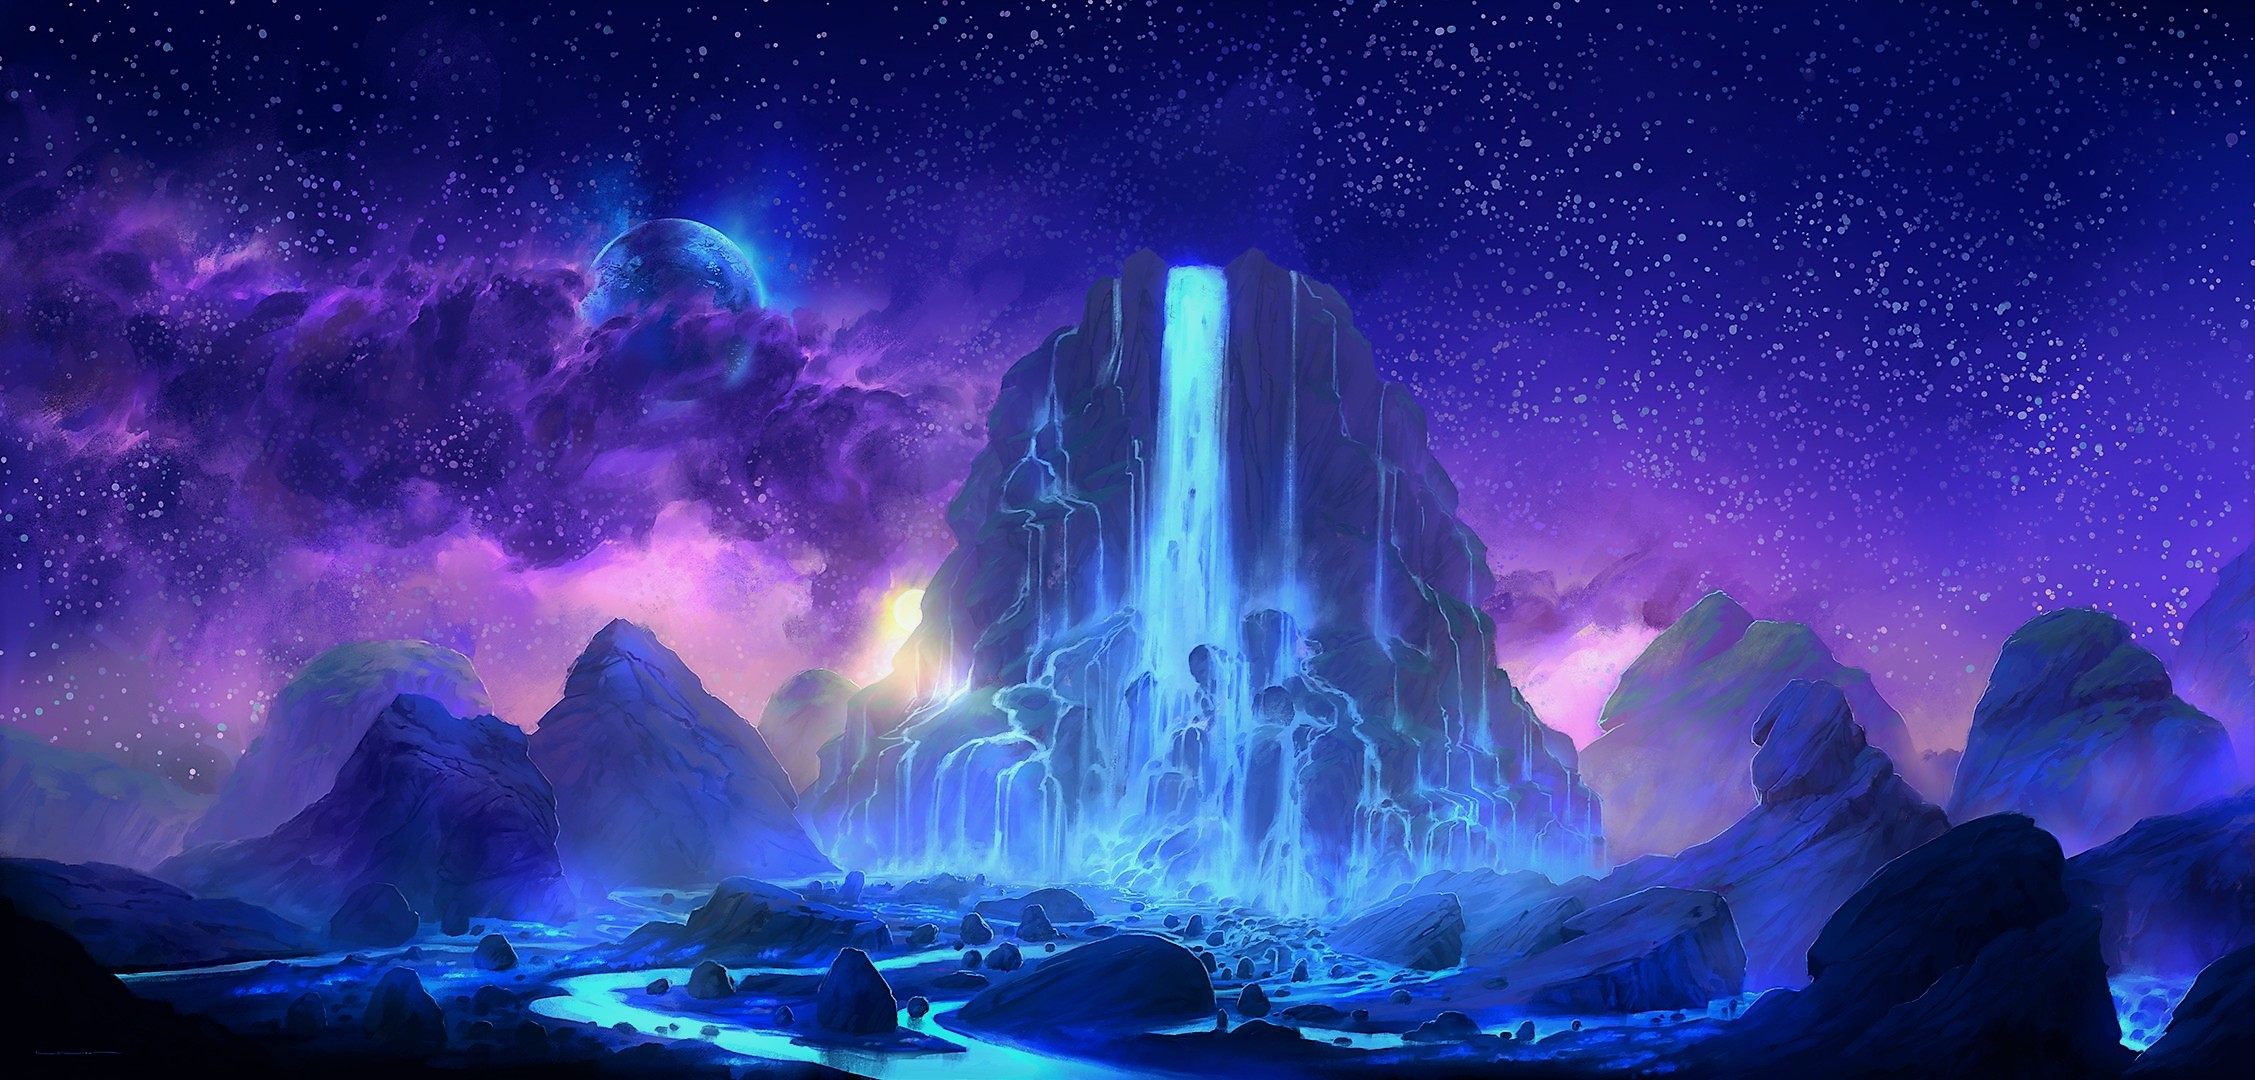 Purple and Blue Fantasy World by Lorant Toth